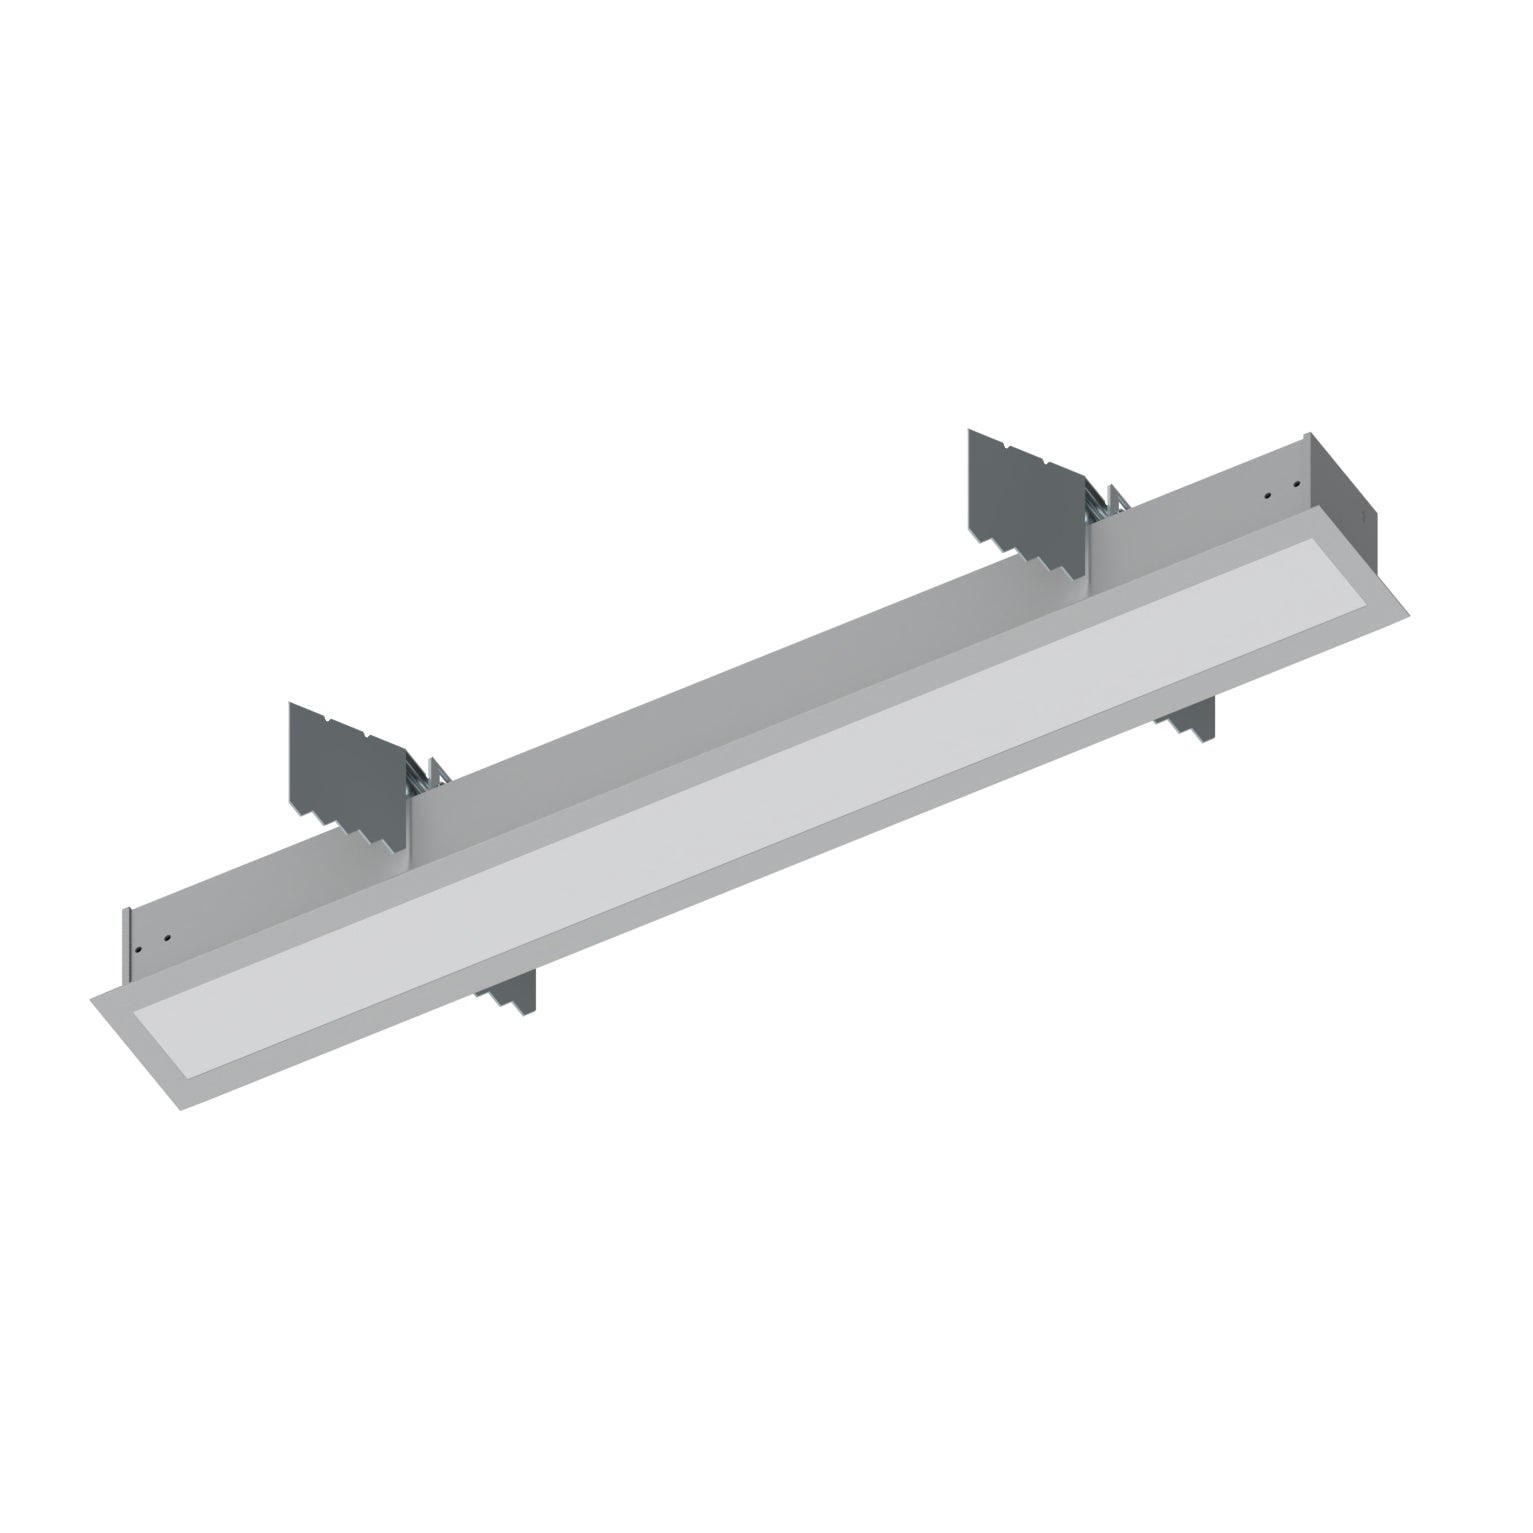 Nora Lighting NRLIN-21035A - Linear - 2' L-Line LED Recessed Linear, 2100lm / 3500K, Aluminum Finish